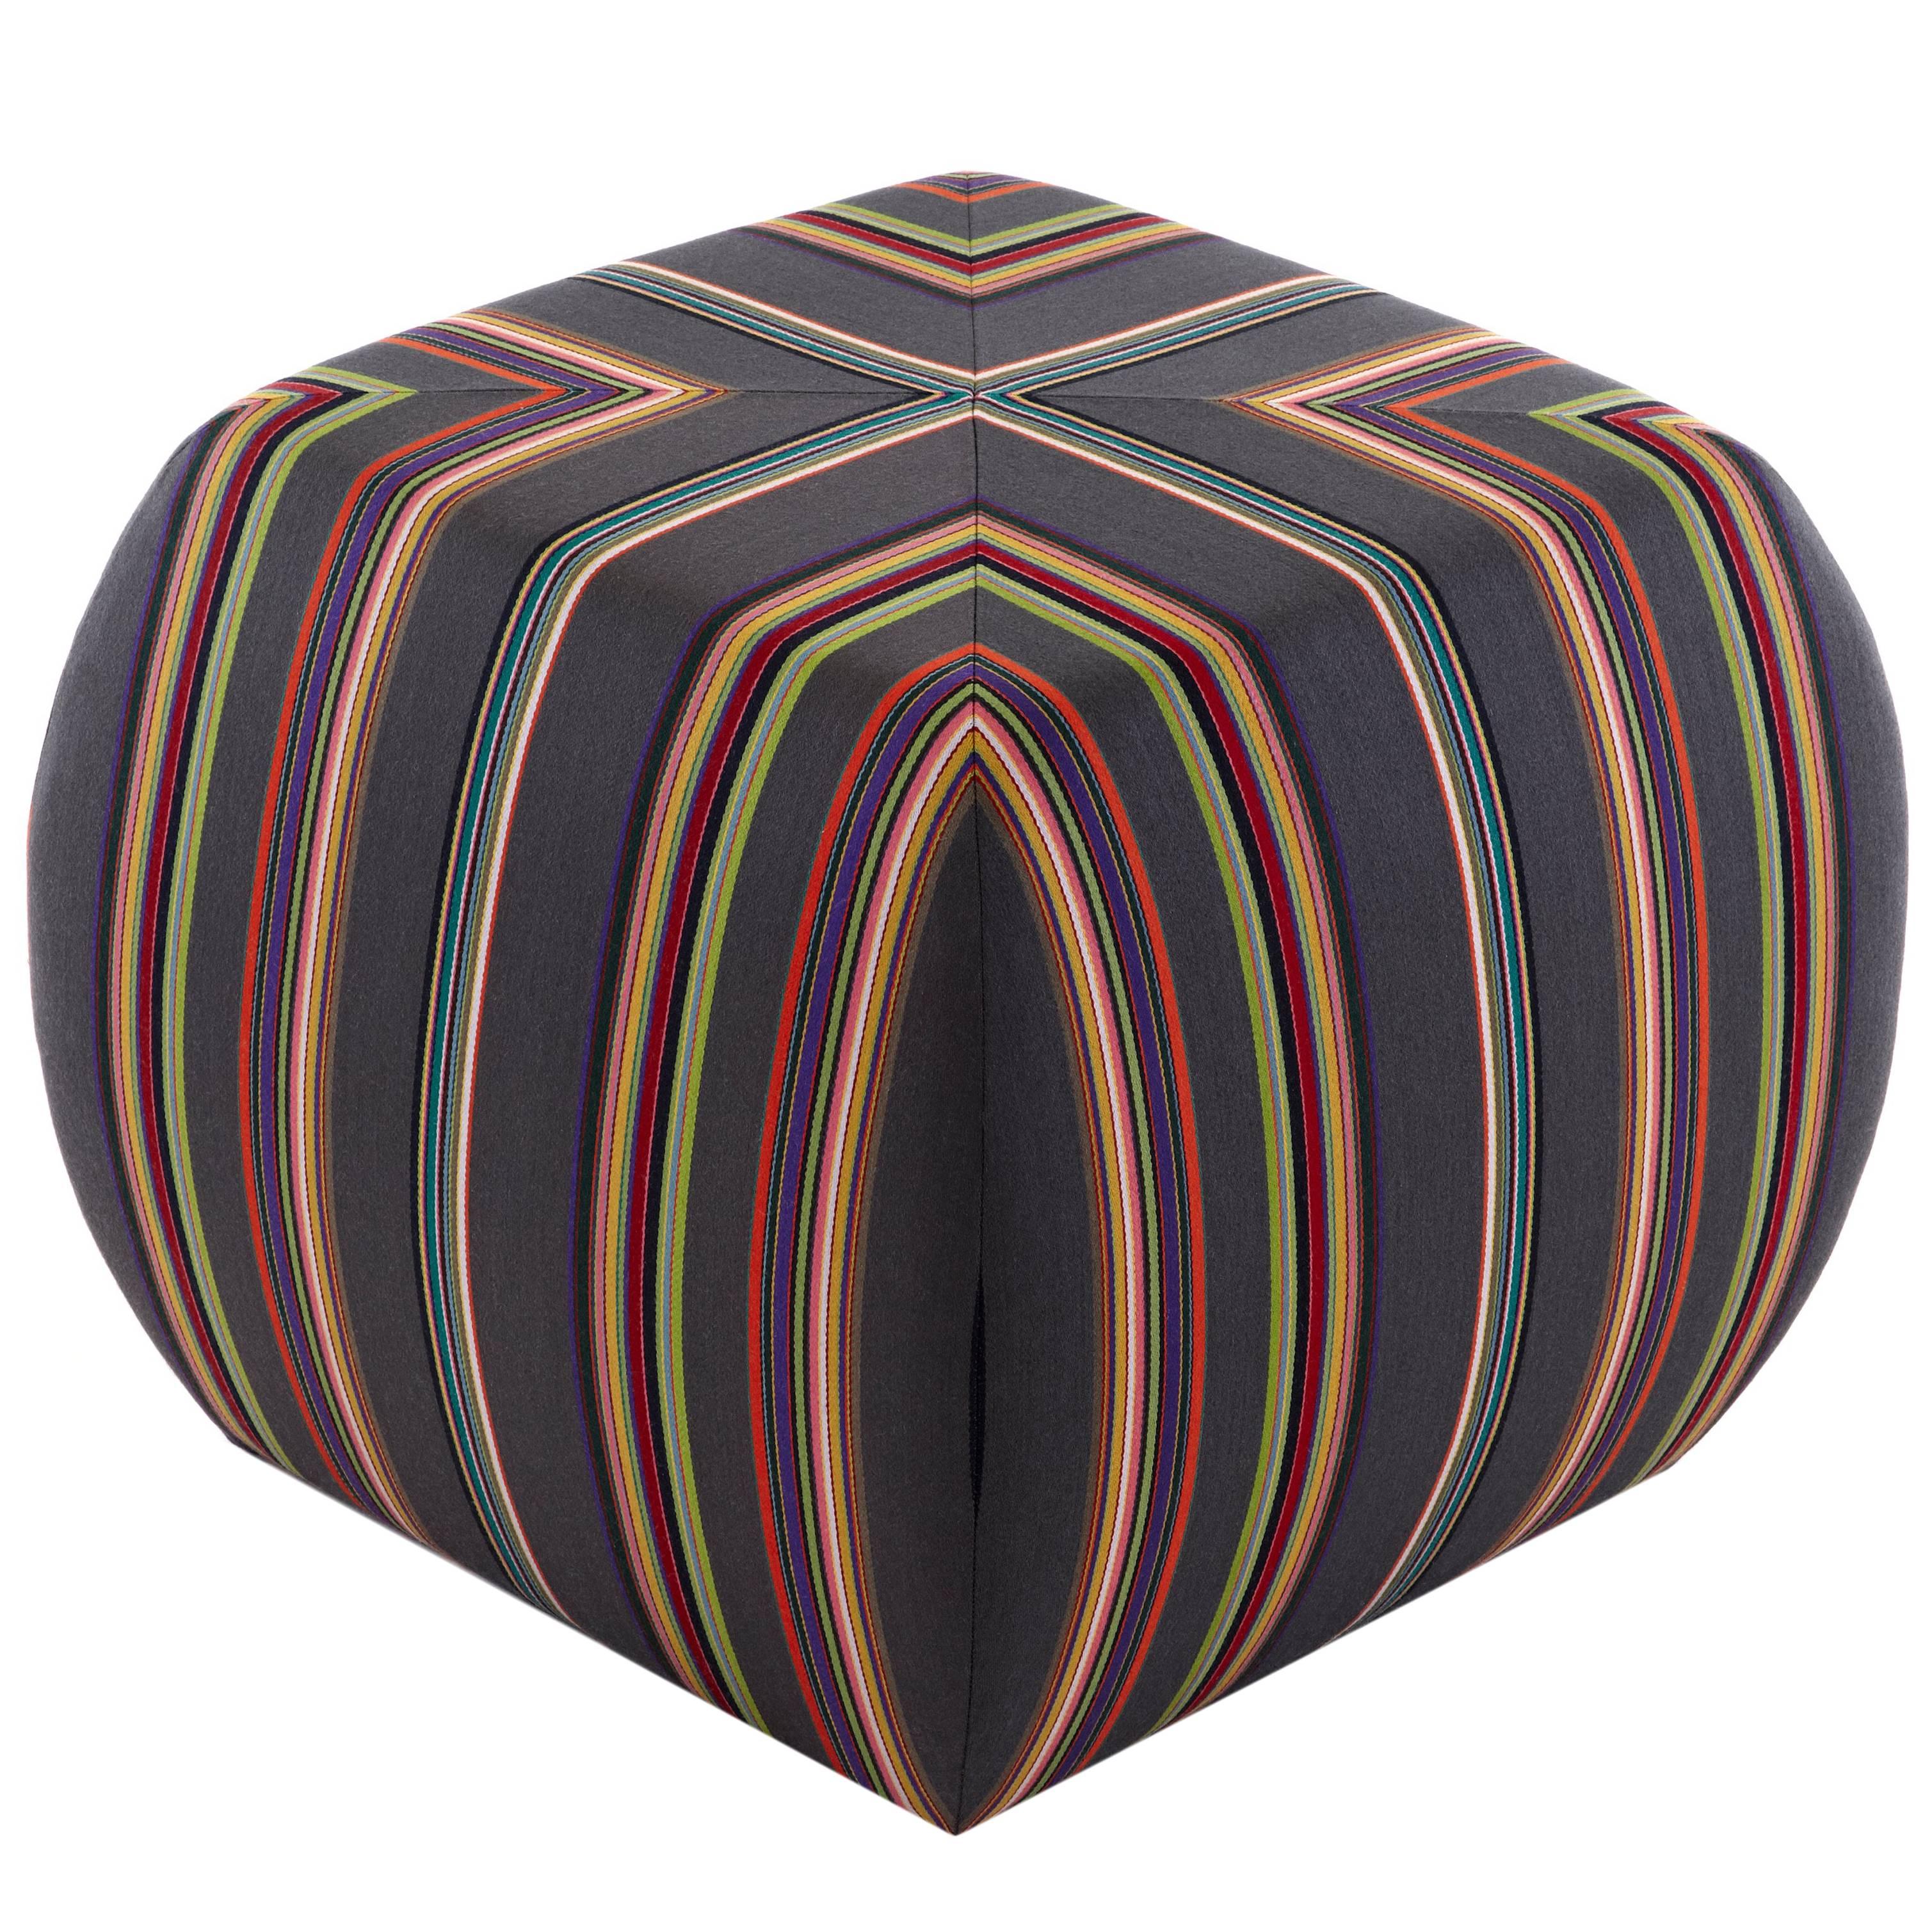 Glide Ottoman striped fabric, Round shapes, custom ottoman with casters movable 